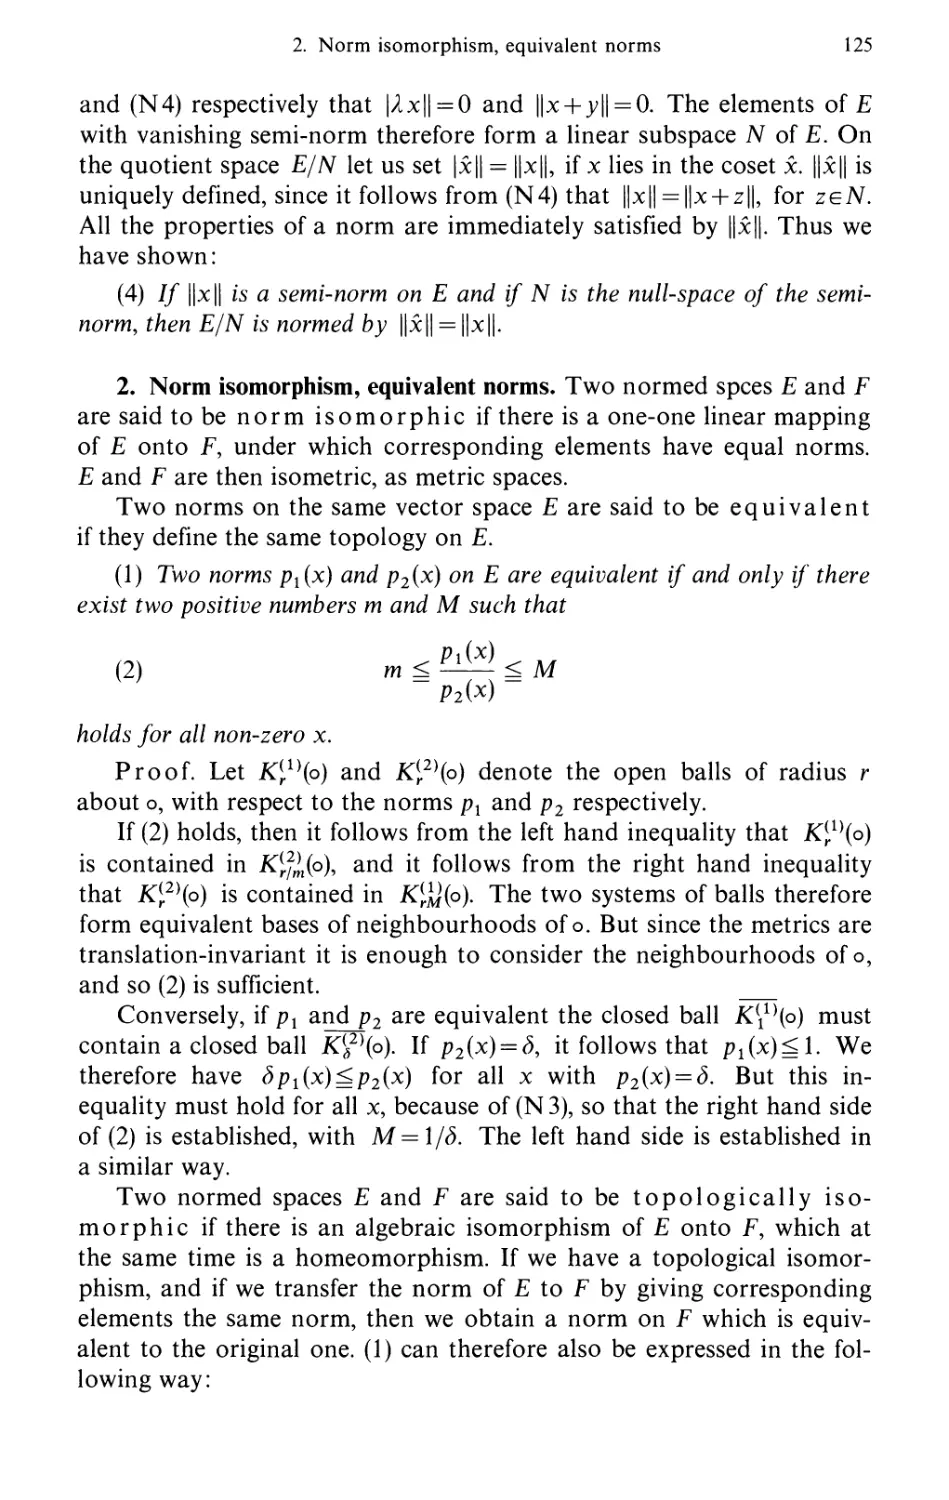 2. Norm isomorphism, equivalent norms